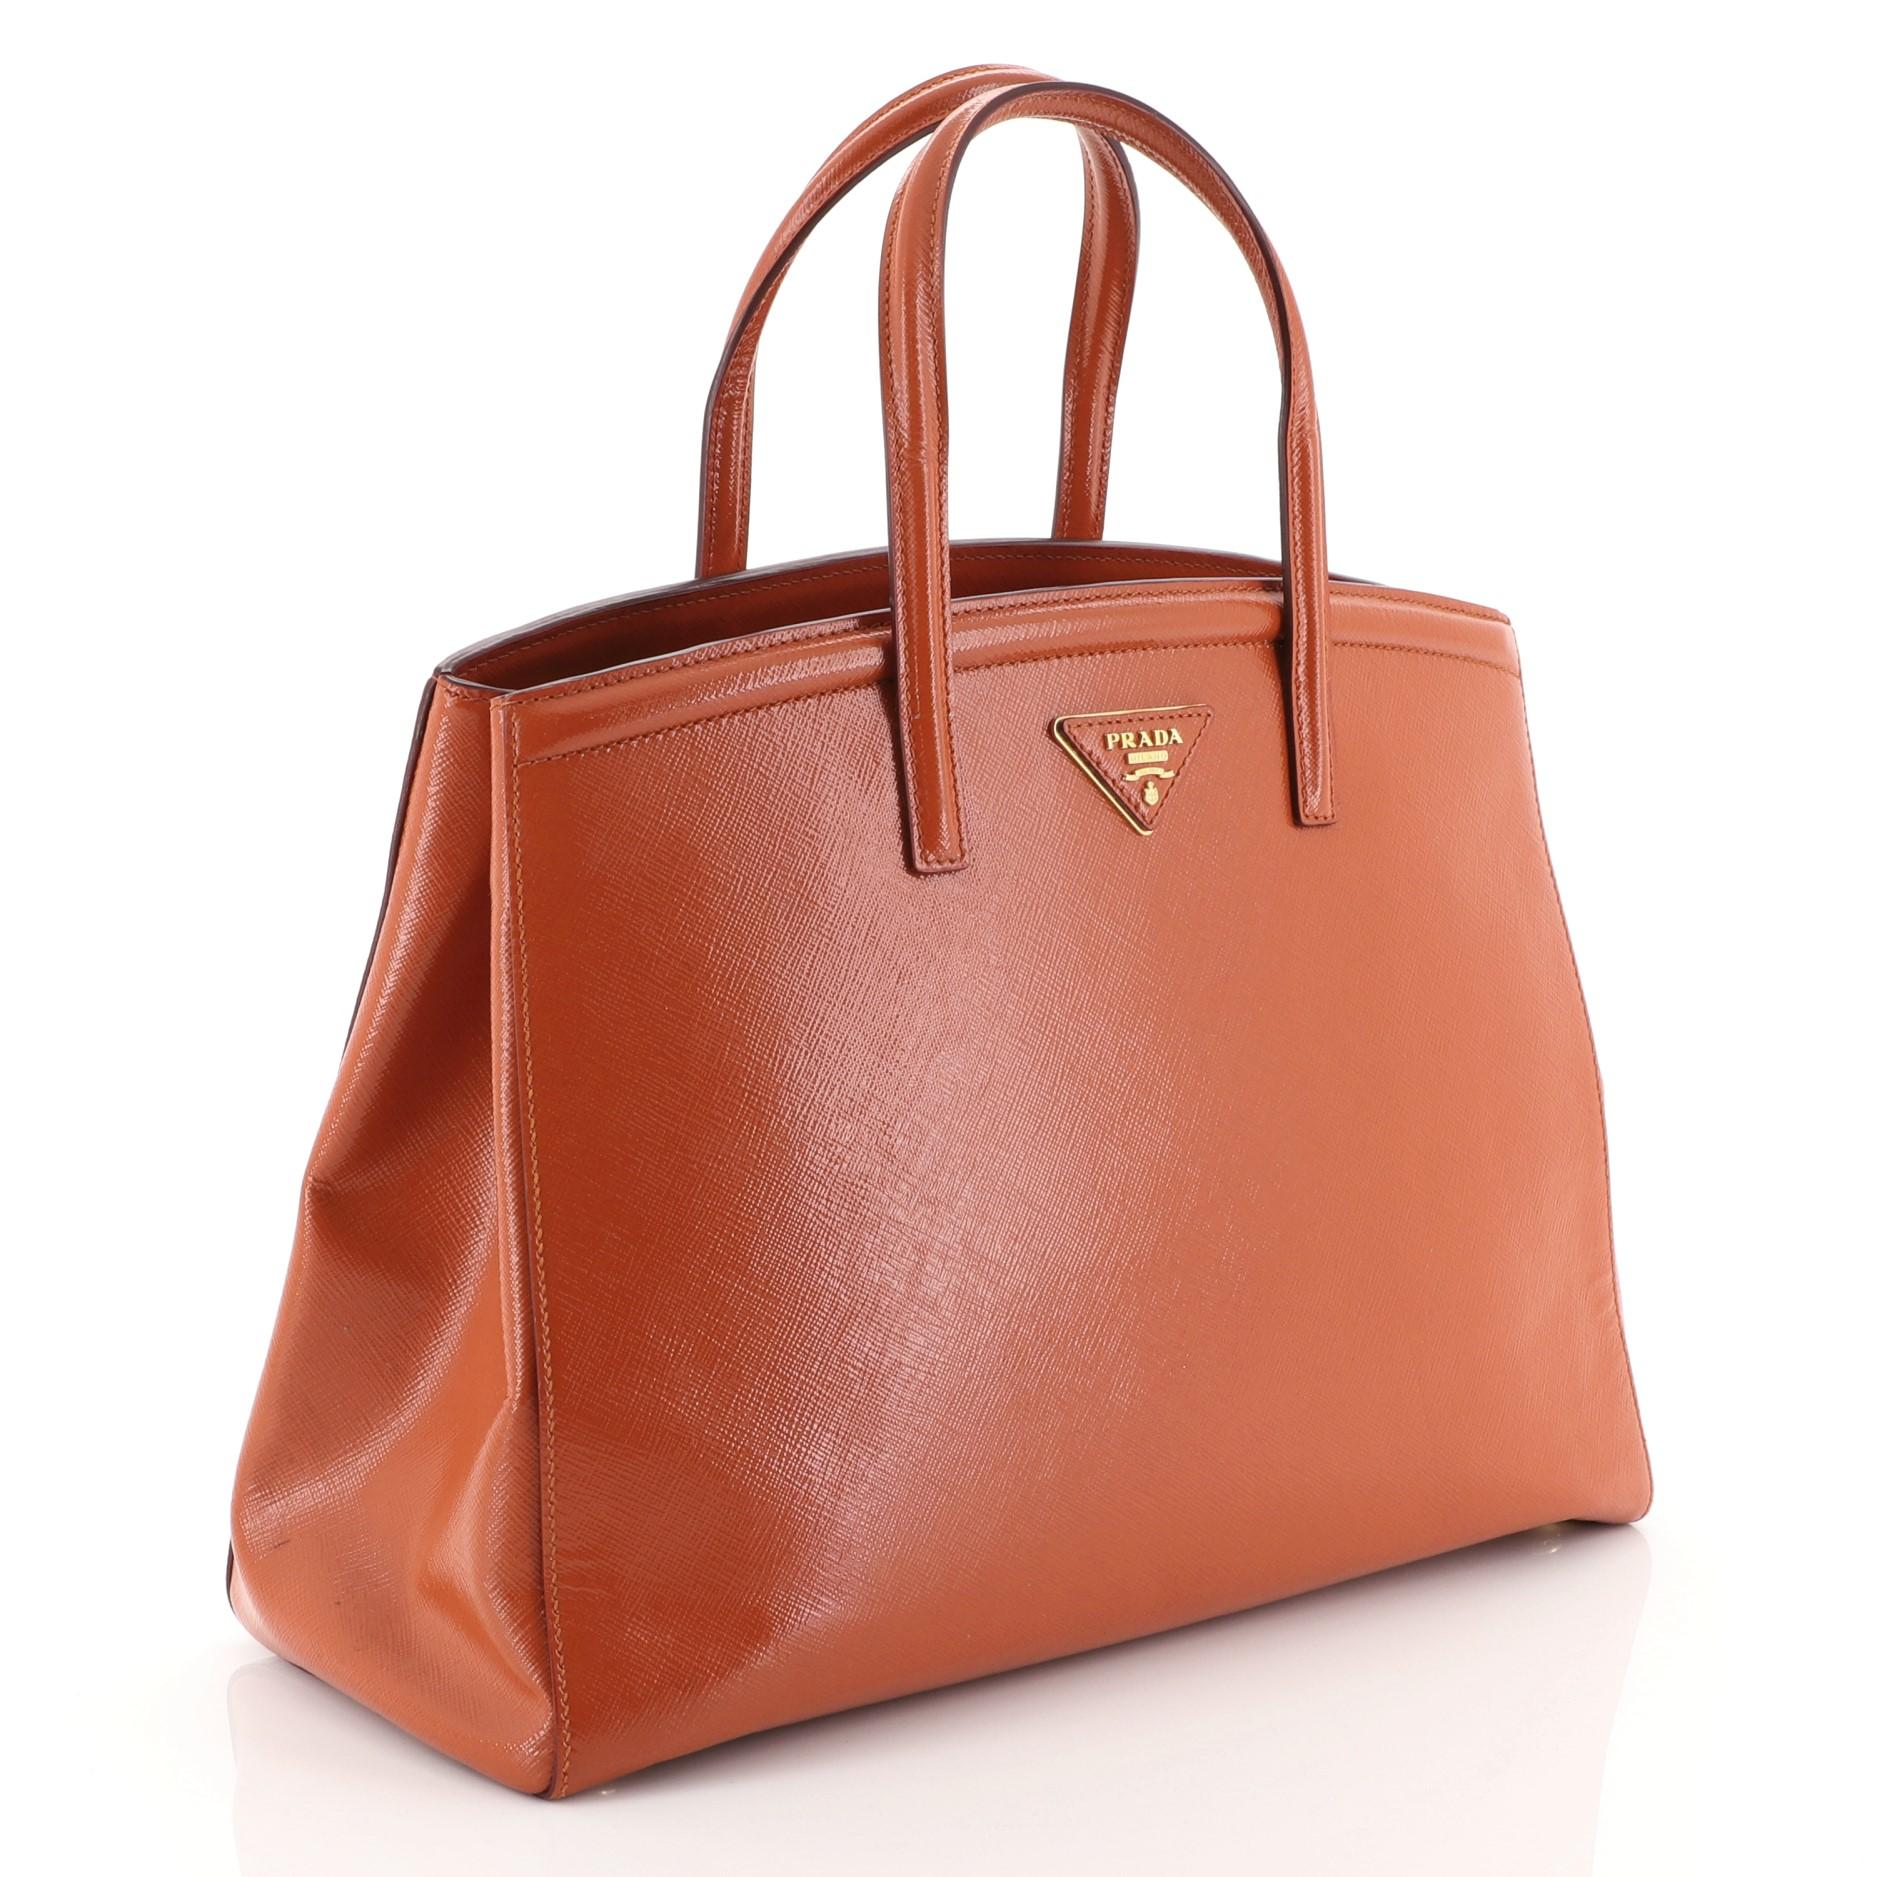 This Prada Slim Convertible Tote Vernice Saffiano Leather East West, crafted in orange vernice saffiano leather, features dual top handles and gold-tone hardware. It opens to an orange fabric interior. 

Condition: Great. Creasing on sides, minor